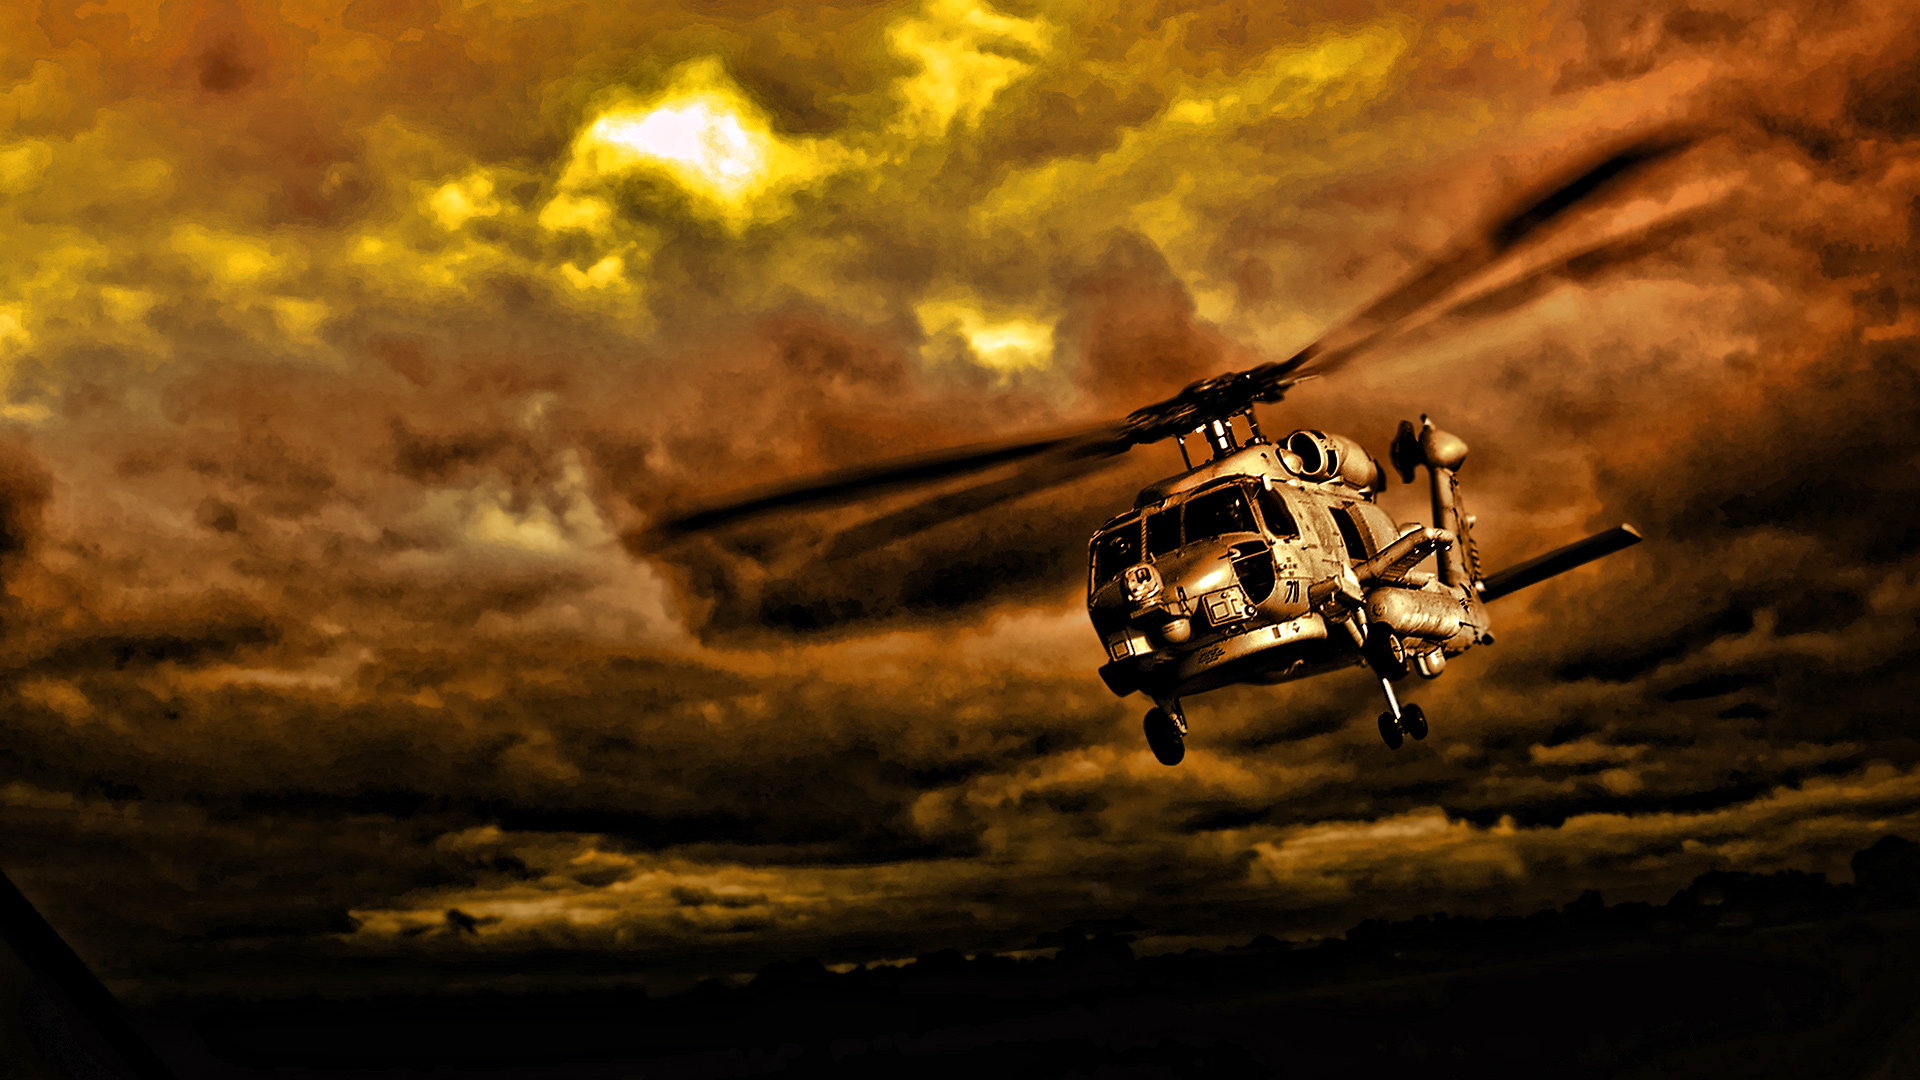 General 1920x1080 helicopters sunset vehicle aircraft dark